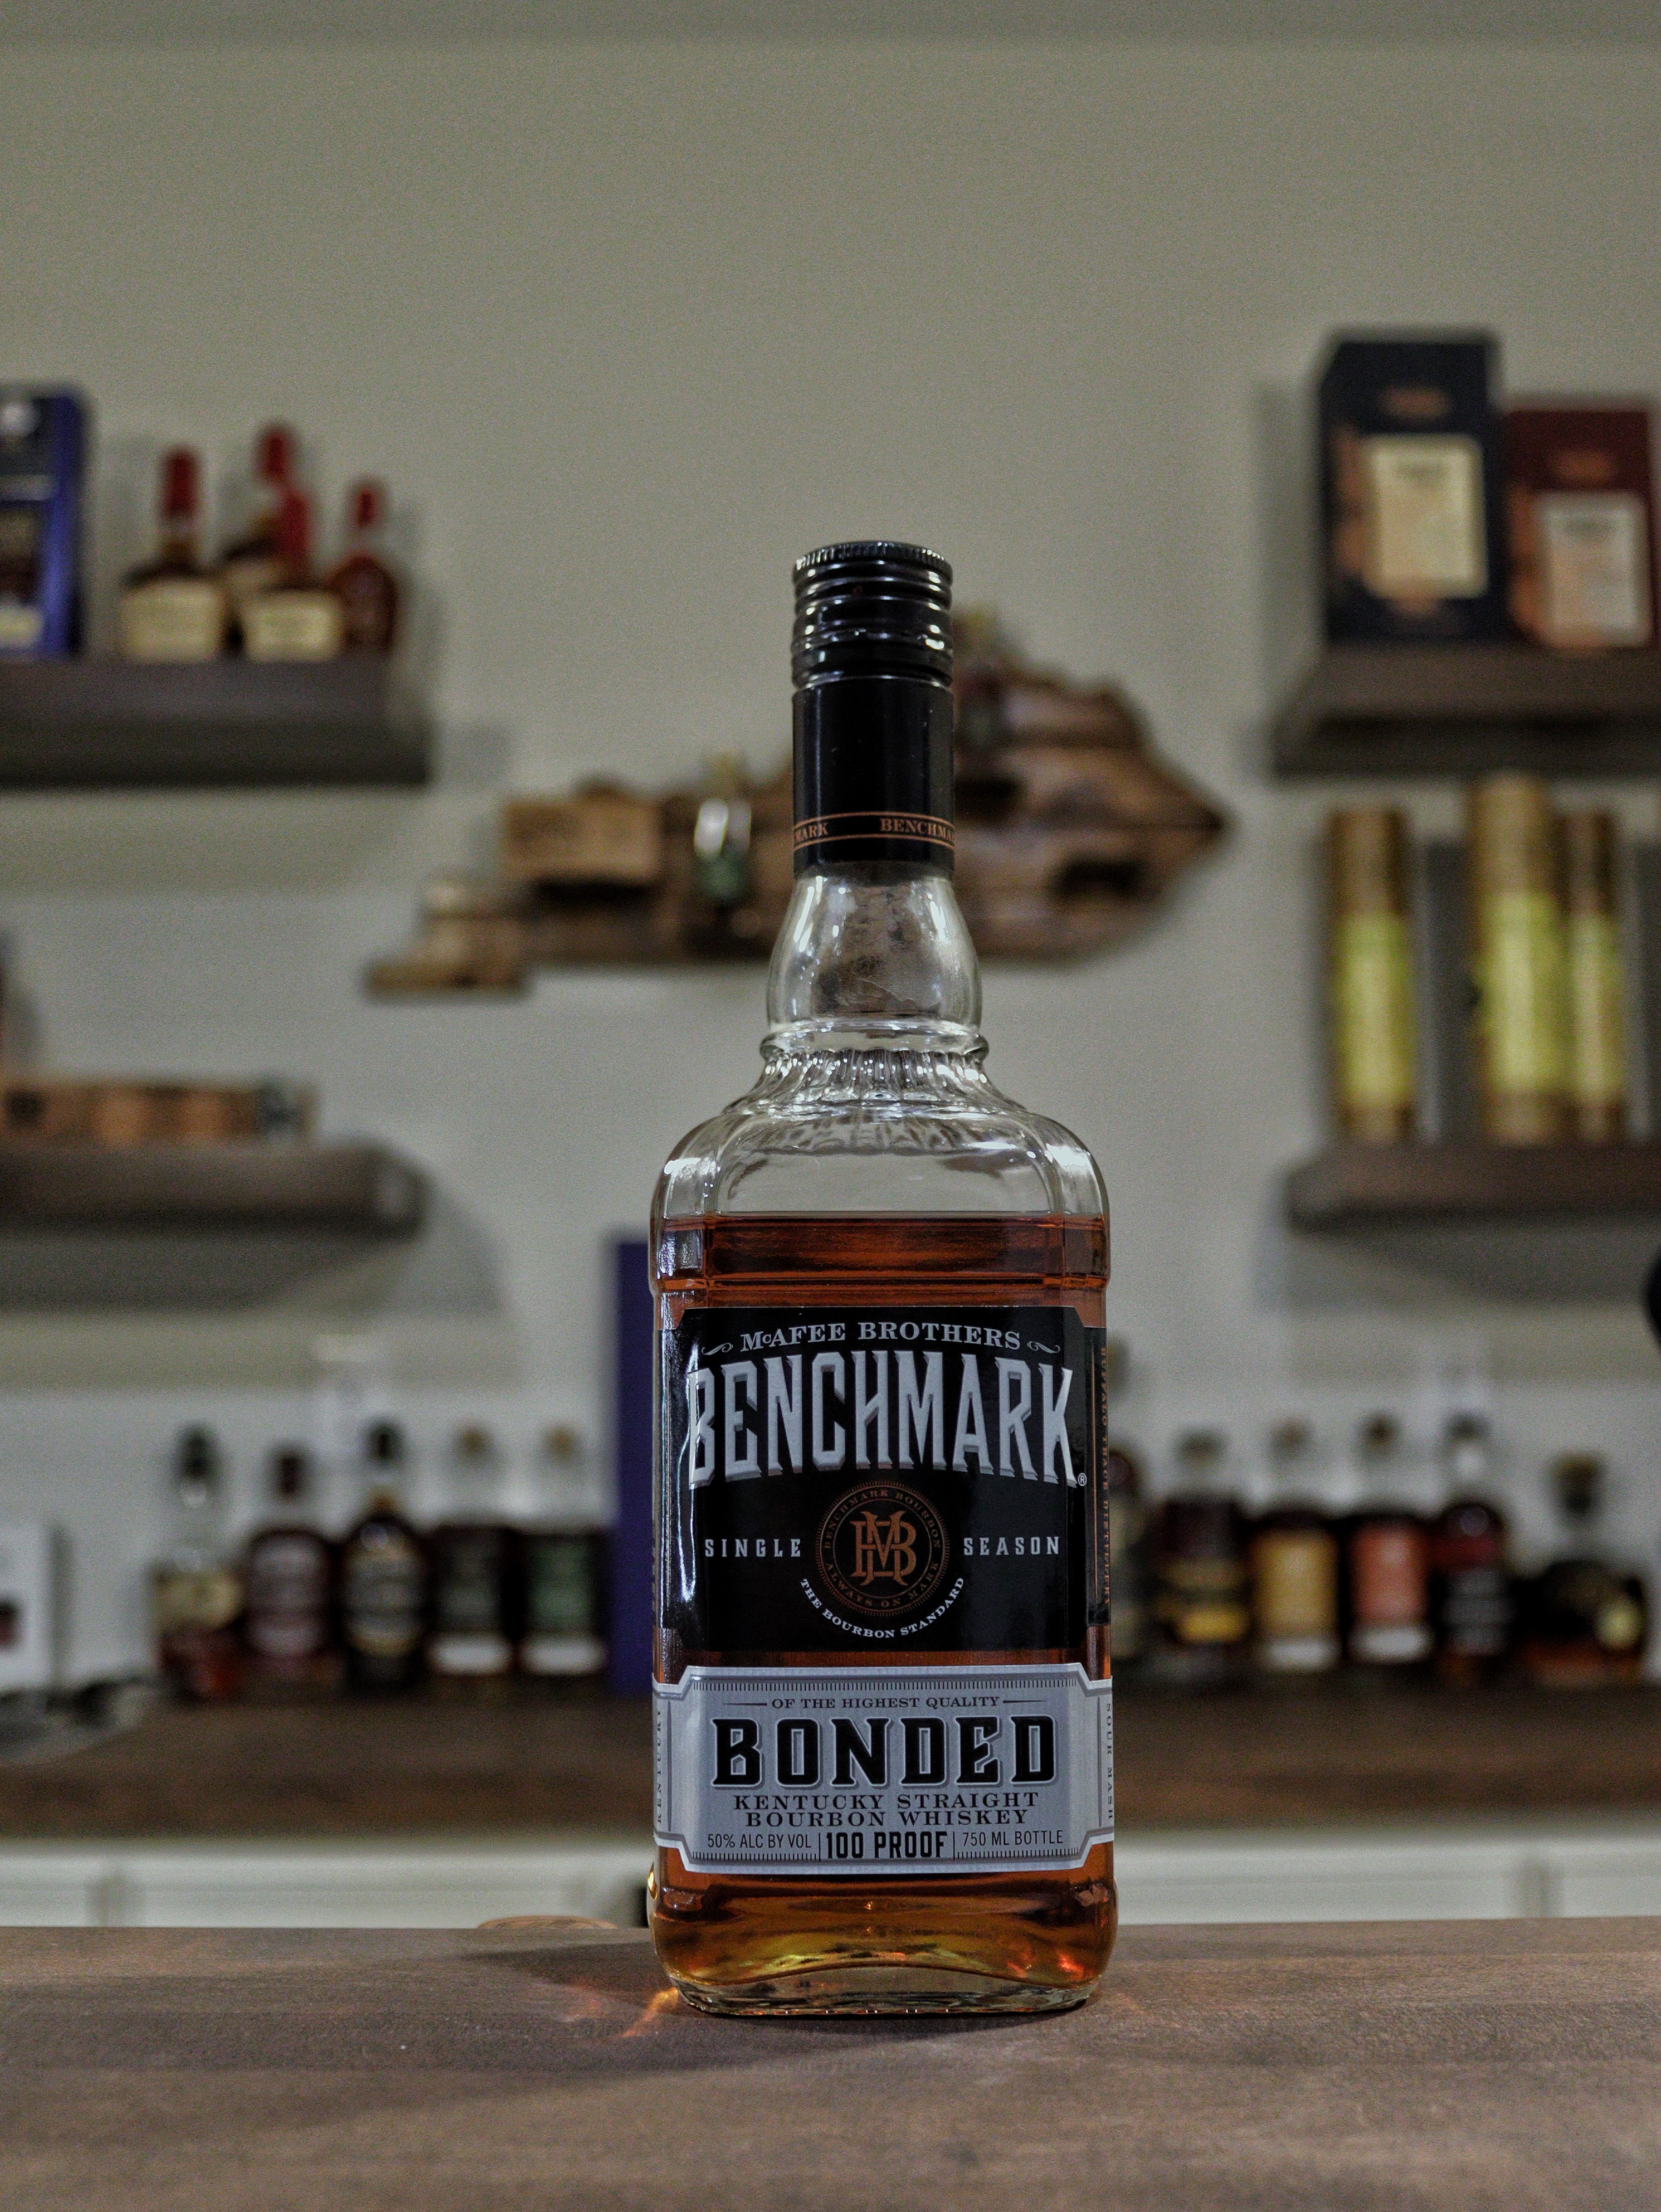 How Good Is Benchmark Bonded Whiskey?